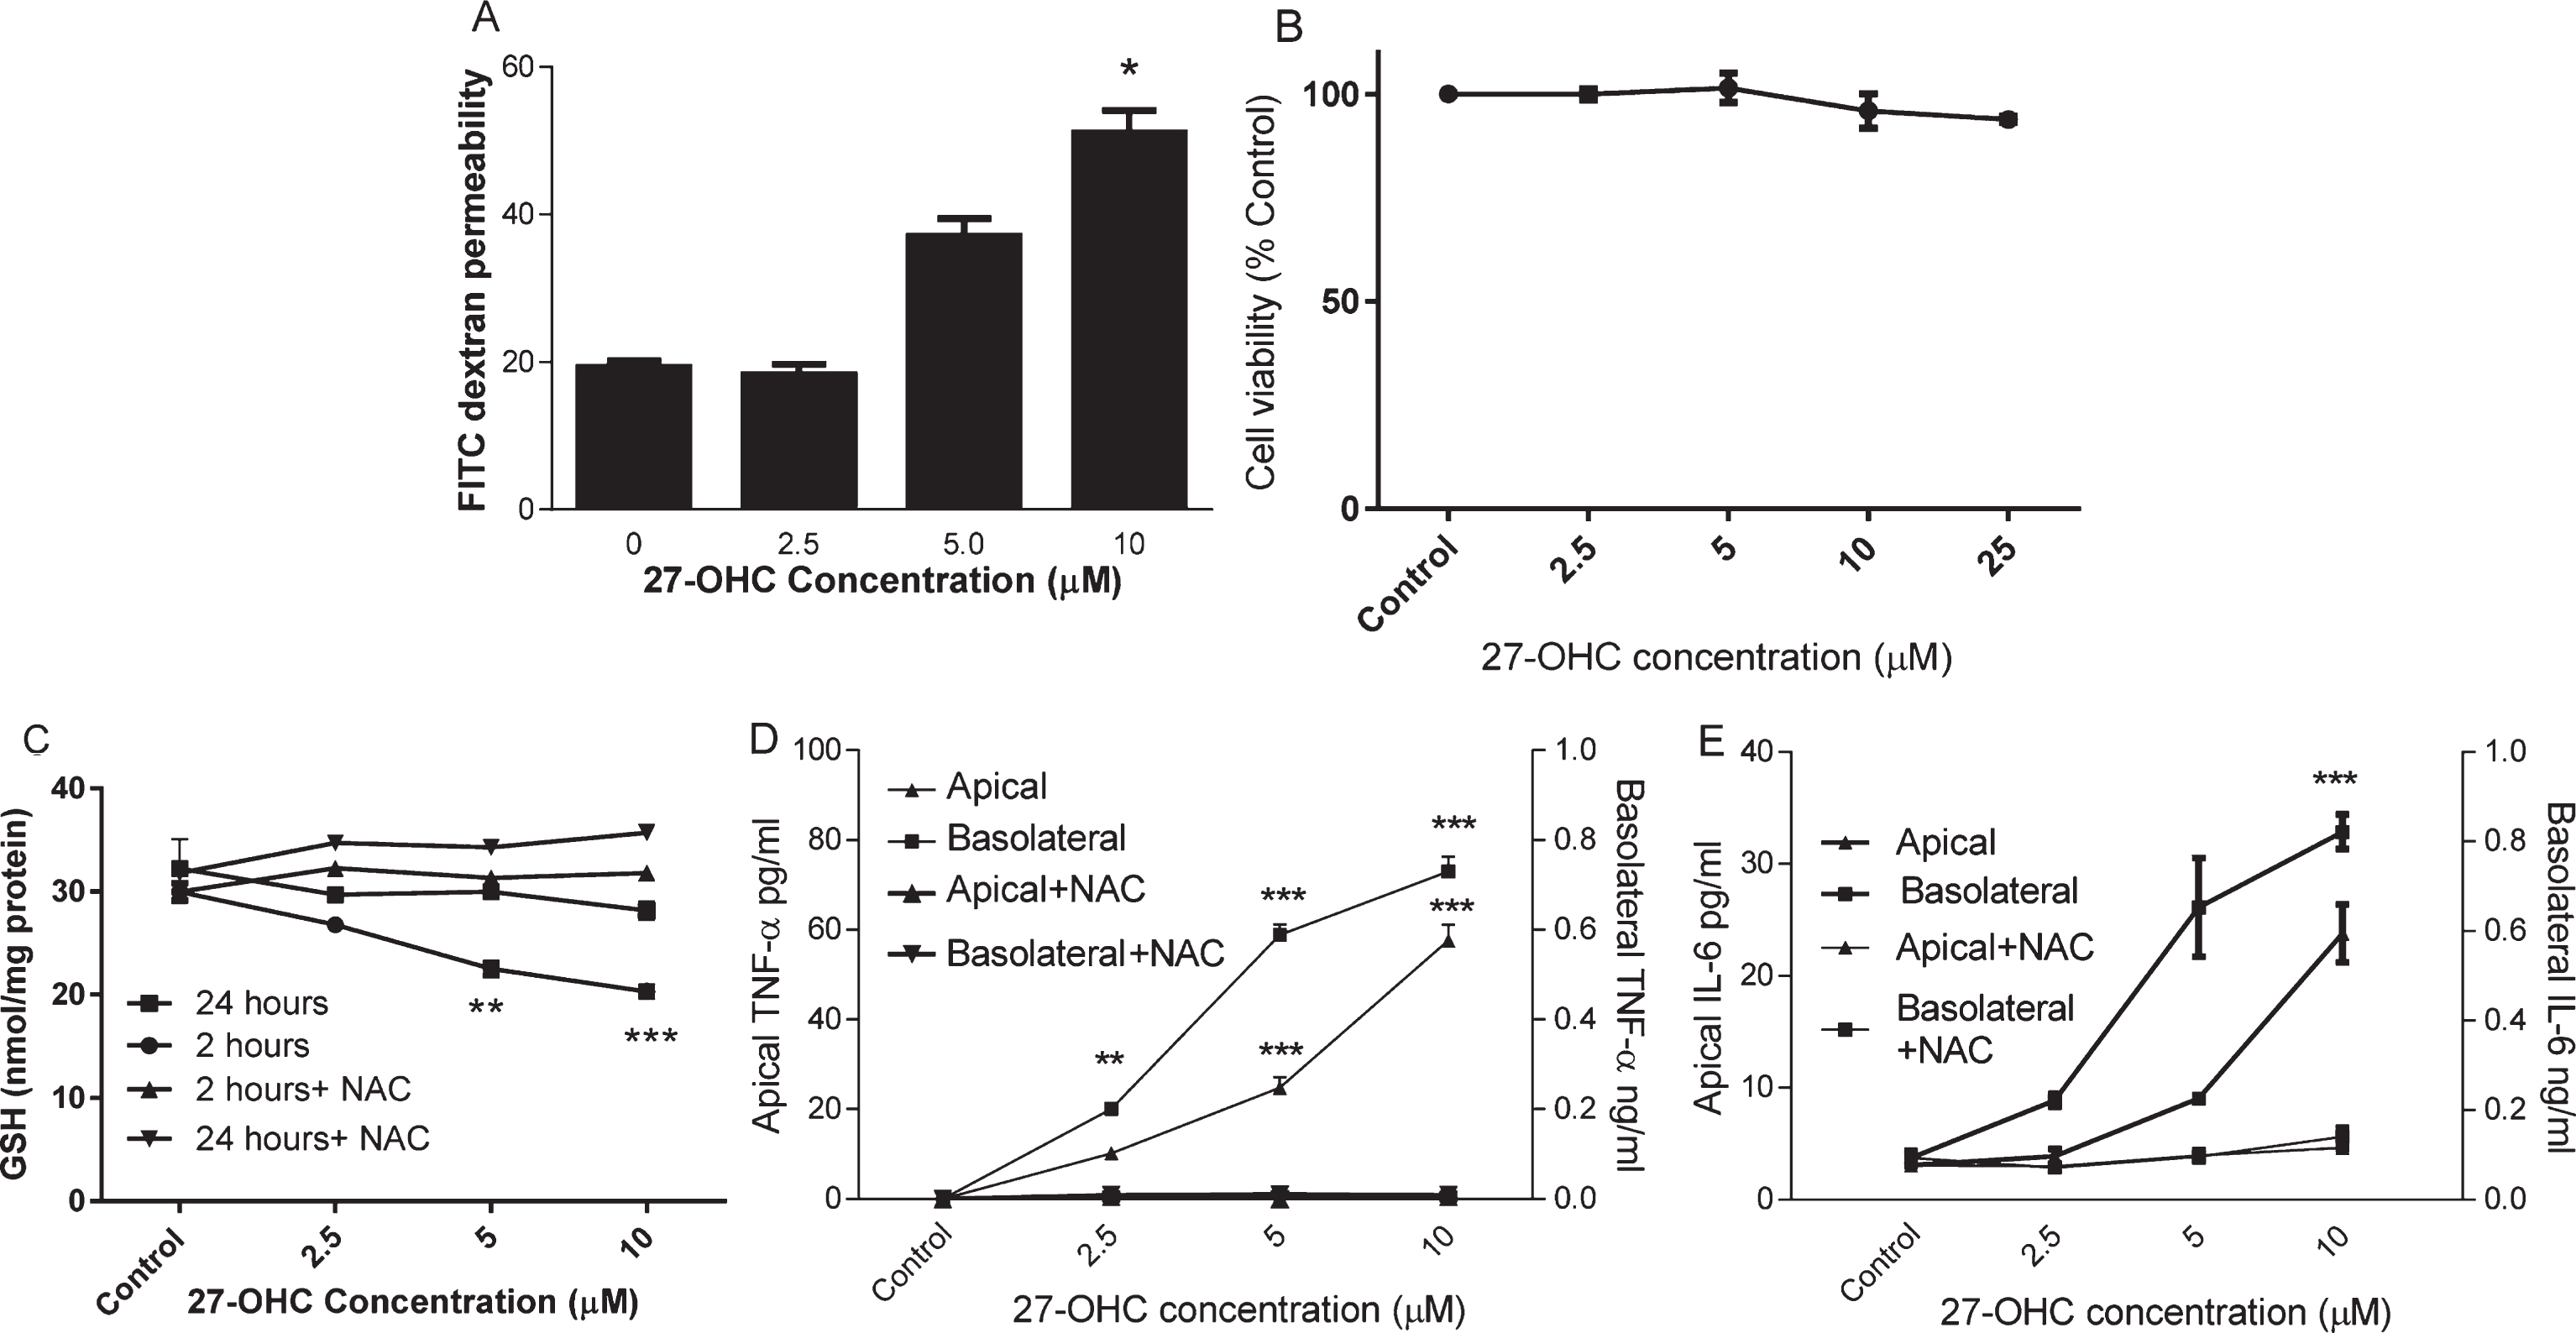 The effect of 27-OHC on endothelial barrier permeability. HMVEC cells were seeded in Transwell inserts for 2 weeks before treating 27-OHC at 2.5, 5 or 10μM for further 24 h with or without 3mM NAC. Barrier integrity (A), viability (B), Intracellular GSH (C; at 2 and 24 h) and secreted TNF-α and IL-6 levels (D and E) were measured. **p < 0.01, ***p < 0.001, n = 3.